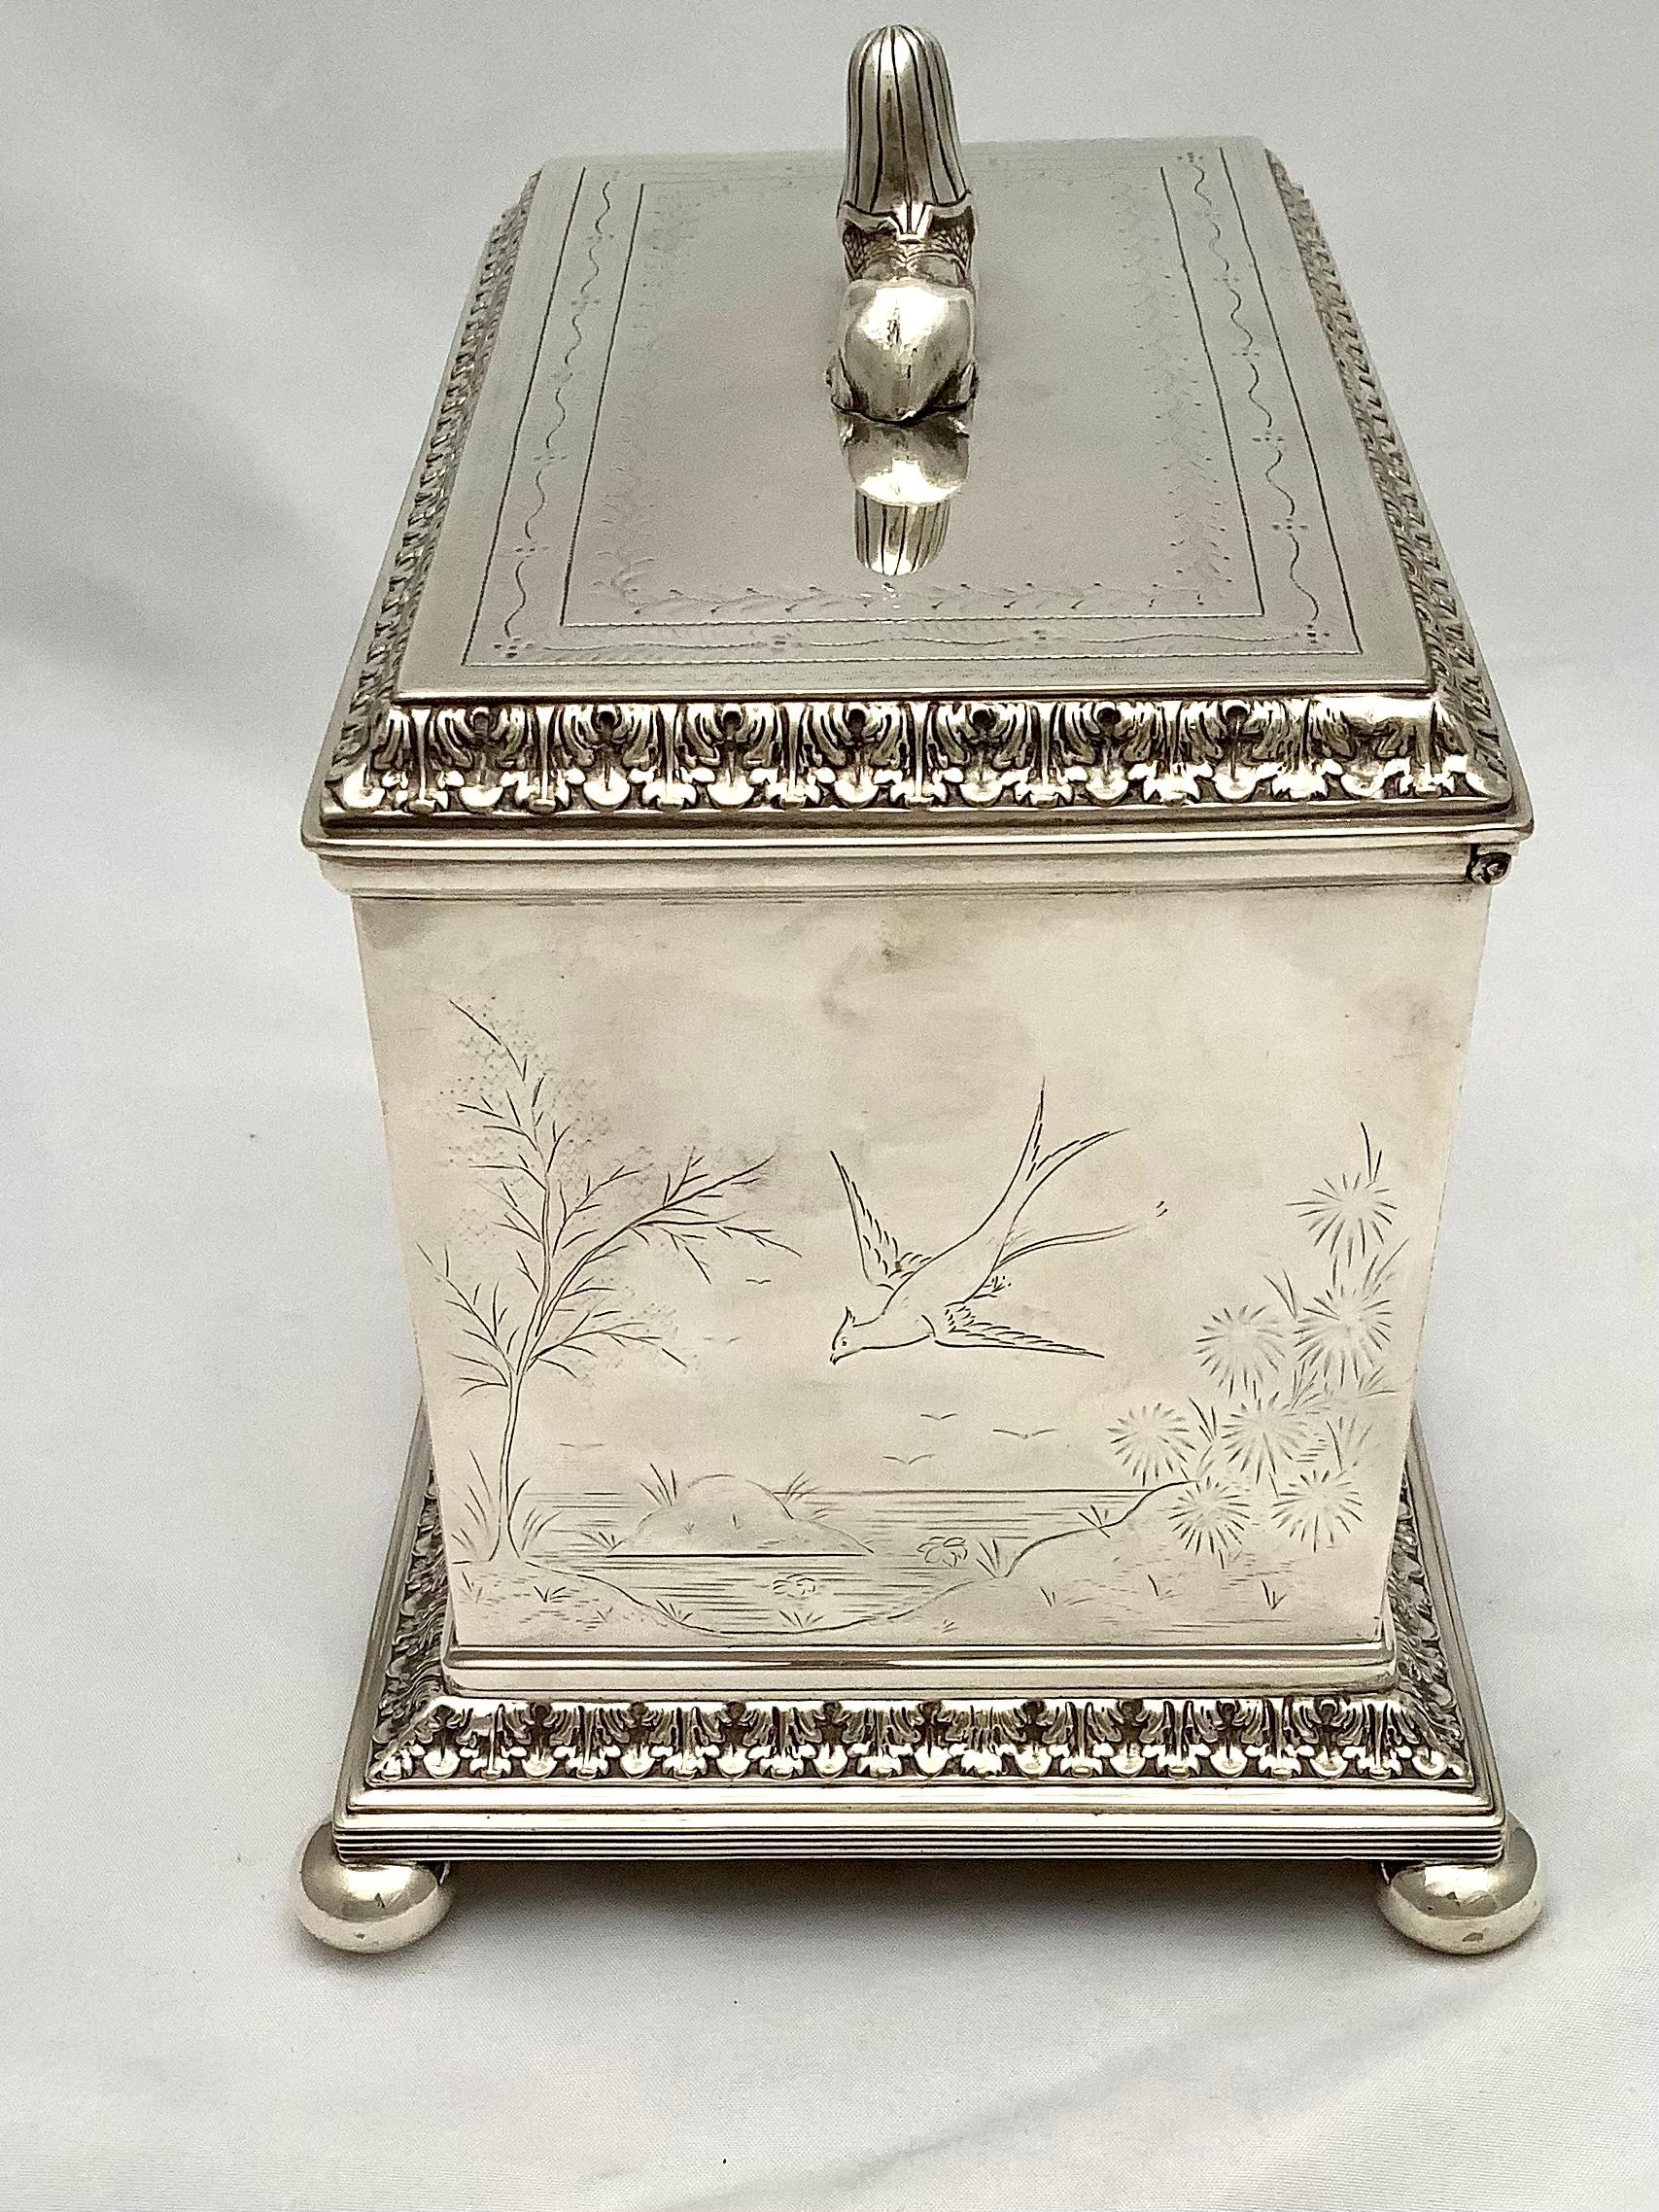 English Silver Box with Asian Decorative Engraving